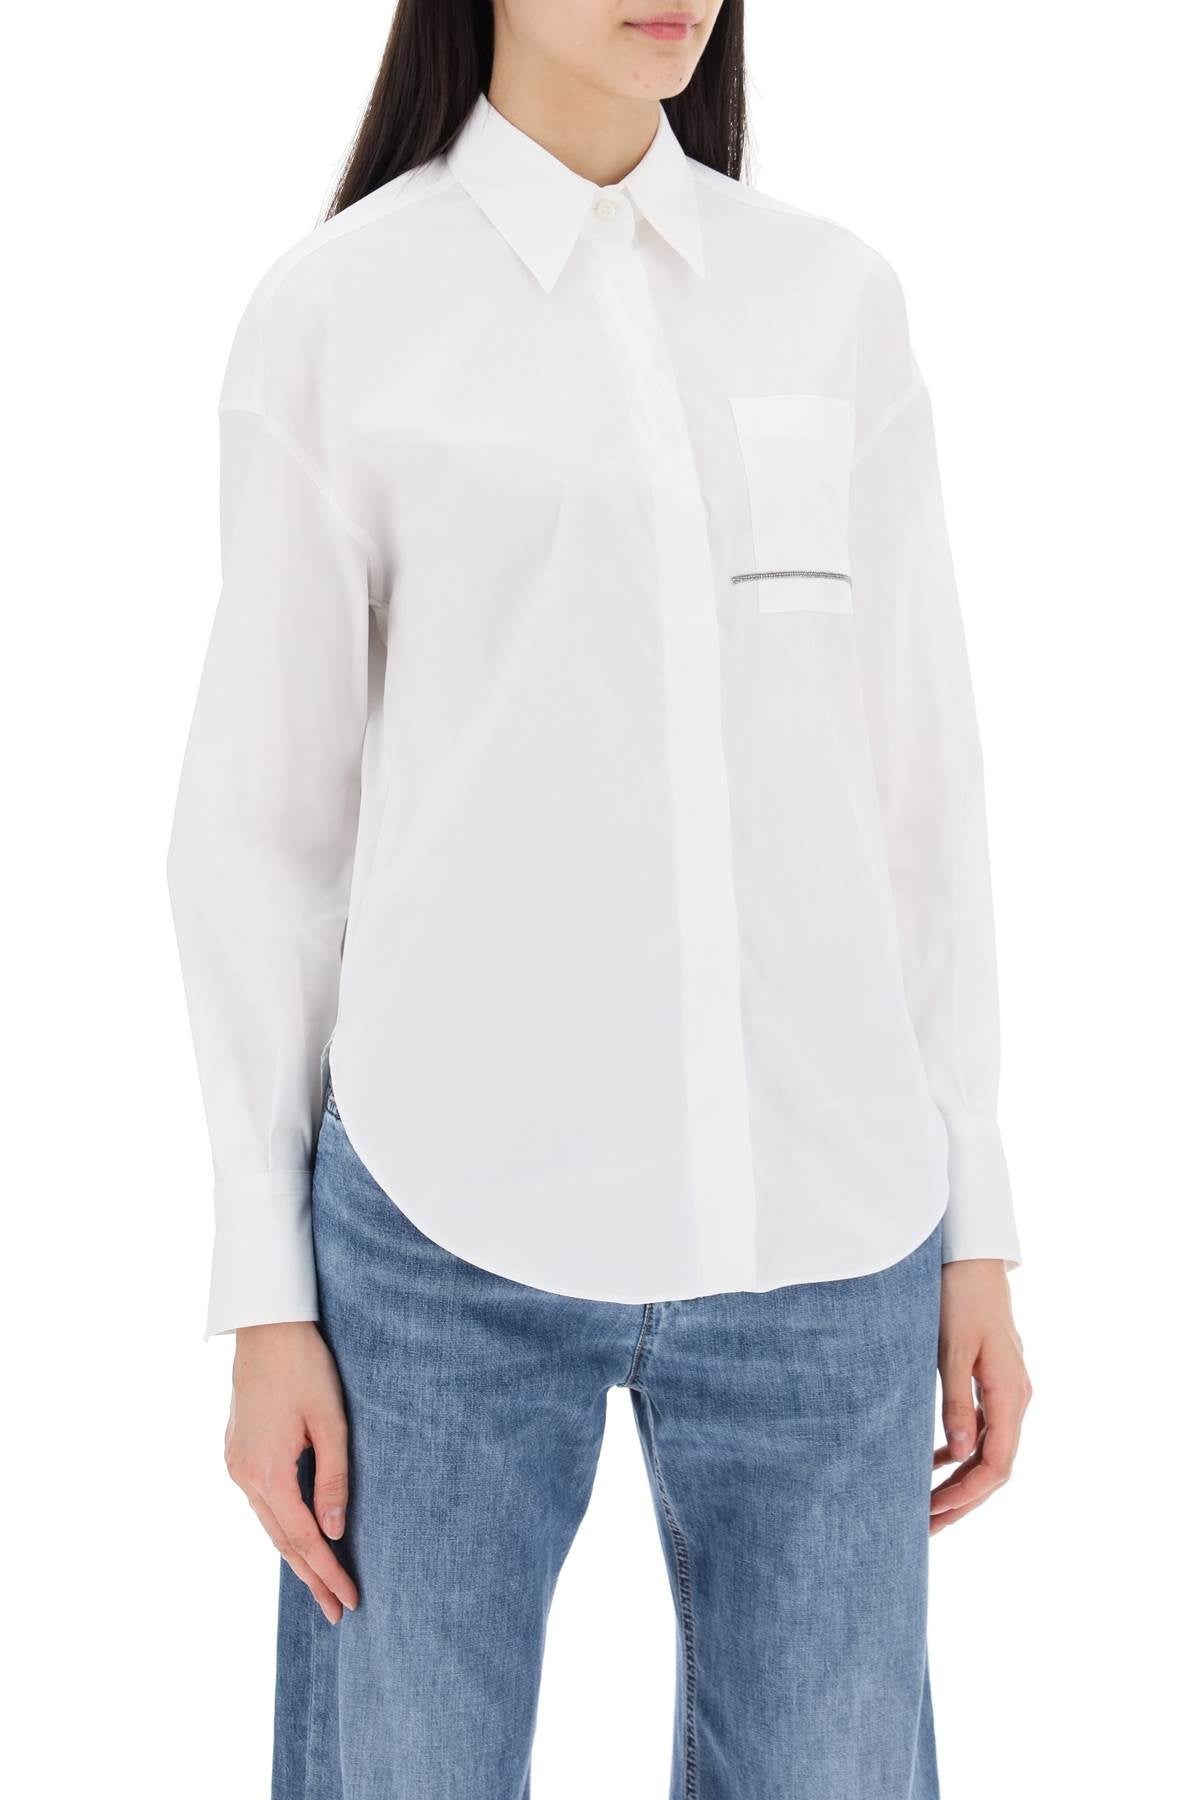 Brunello cucinelli "shirt with jewel detail on the-1